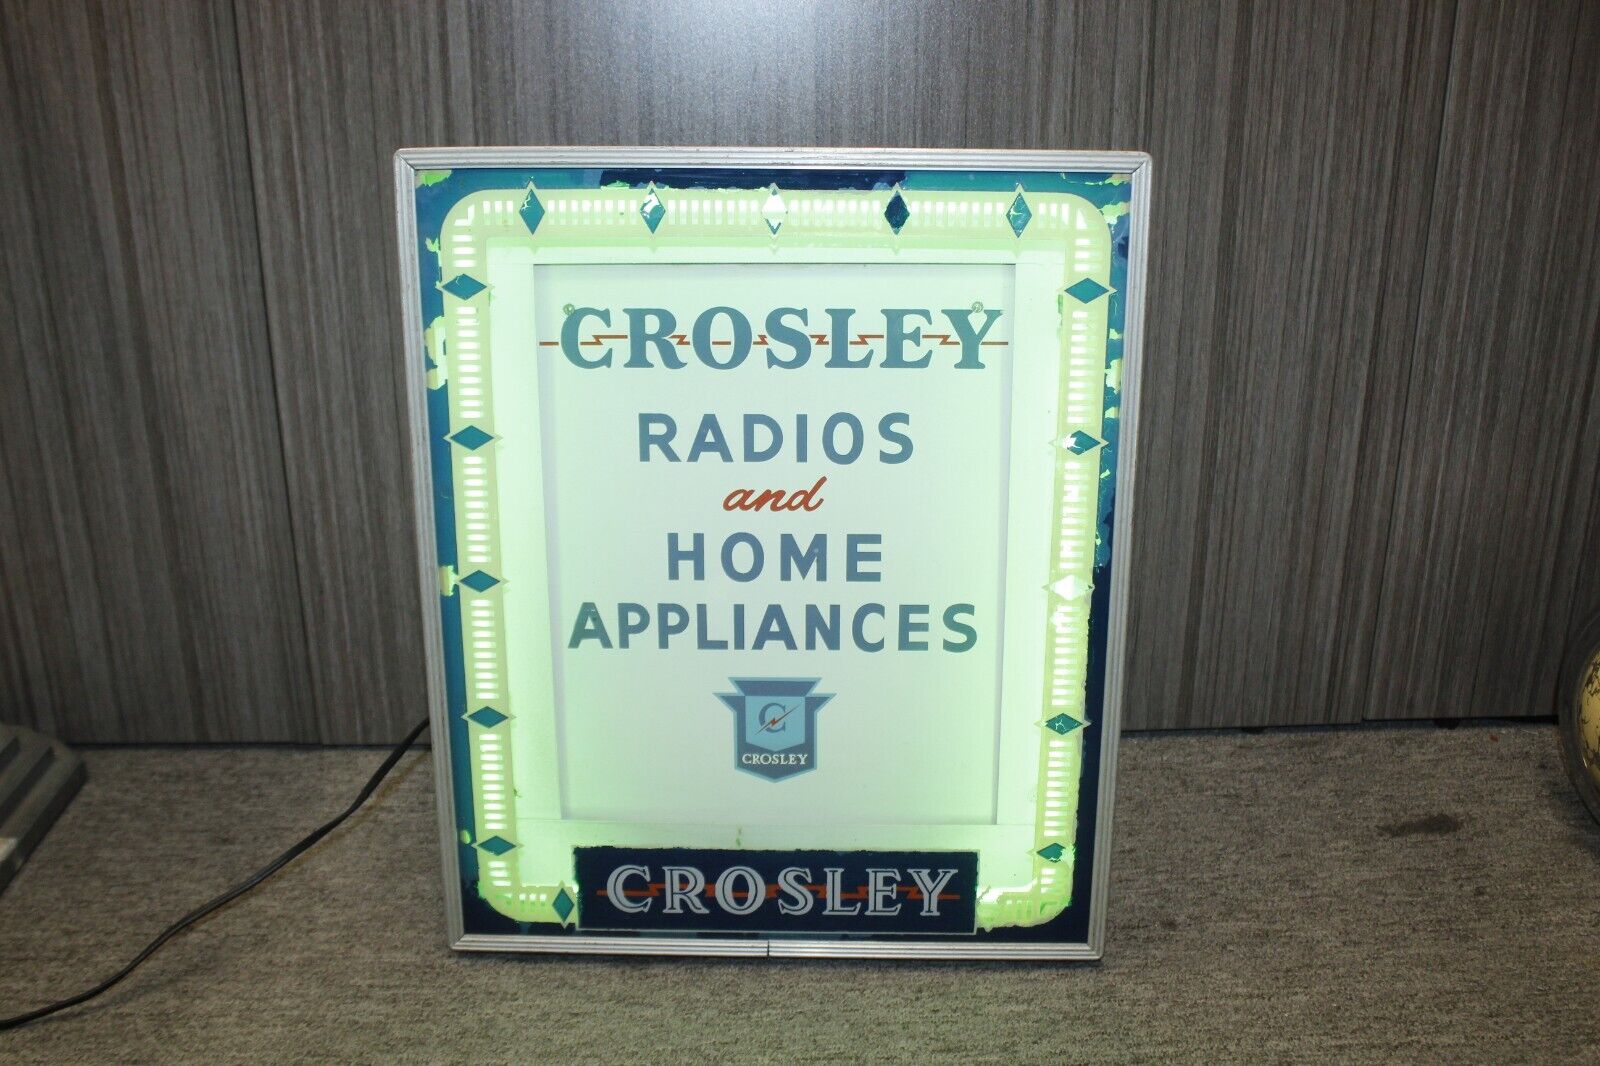 1930-40s Crosley Radios And Home Appliances Advertising Sign by Neon Products